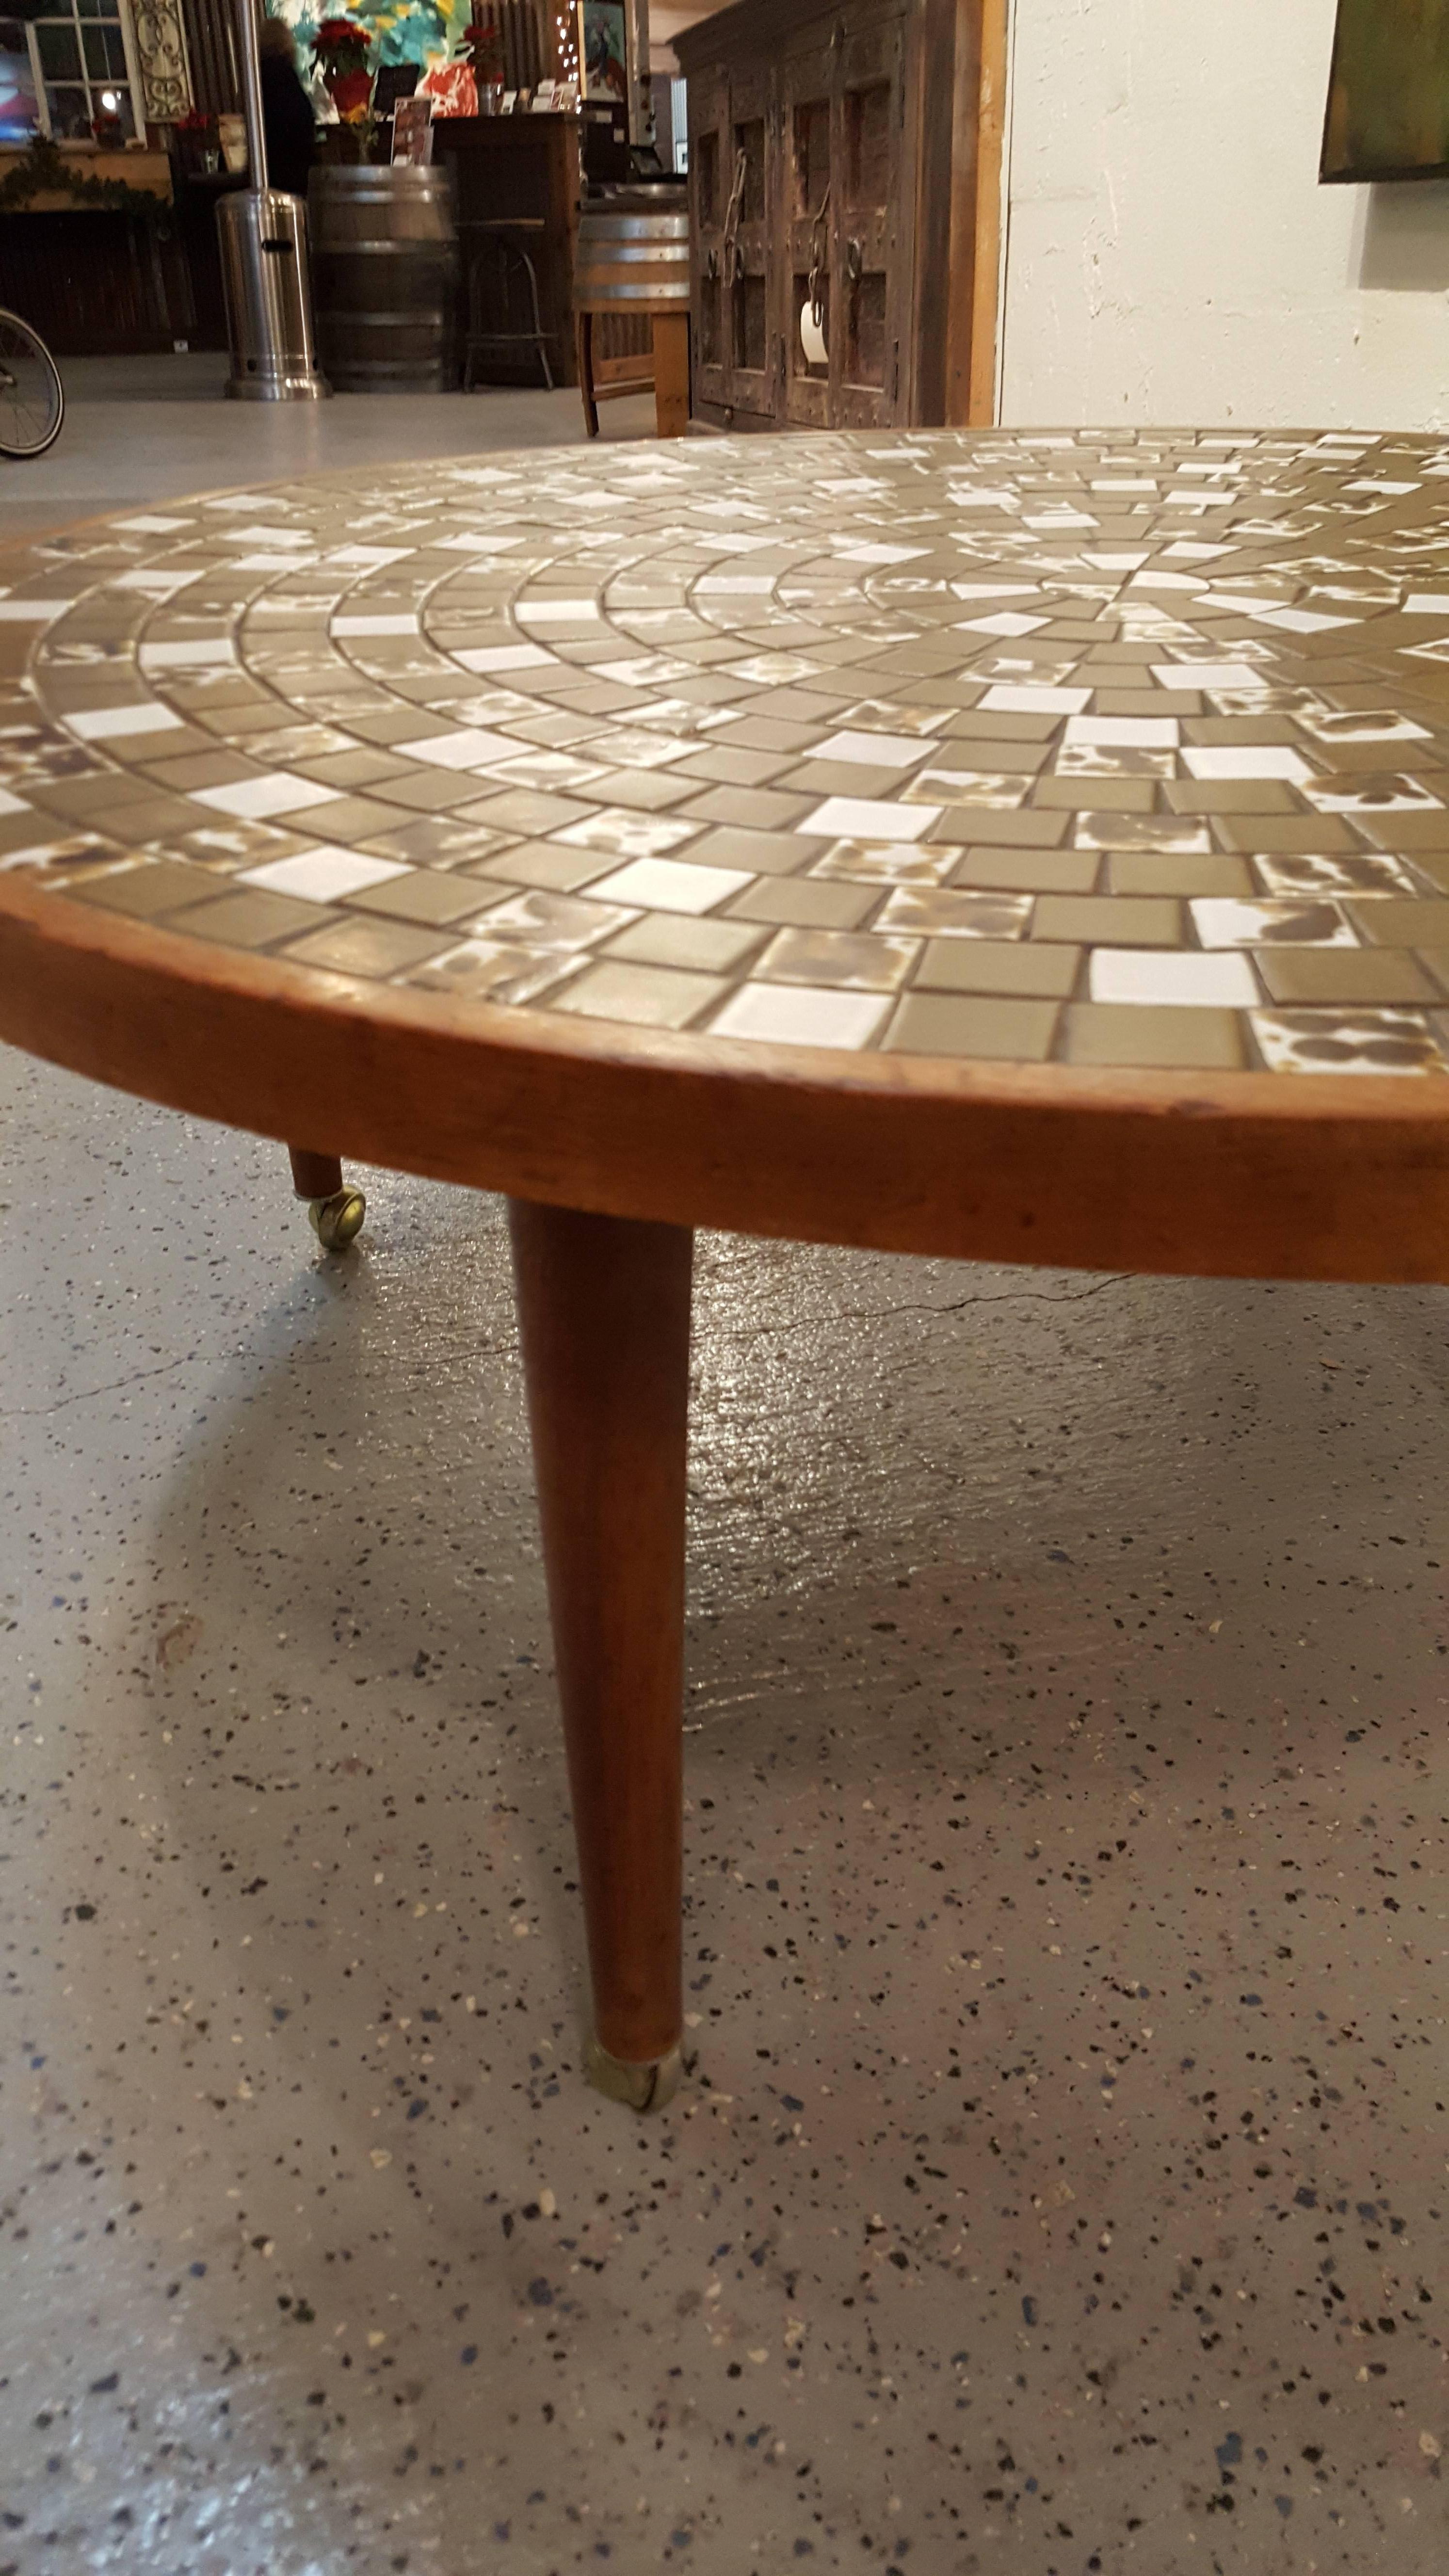 A Mid-Century Modern circular mosaic tile coffee table by Gordon & Jane Martz for Marshall Studios. Circa 1960s. Solid walnut frame and conical 